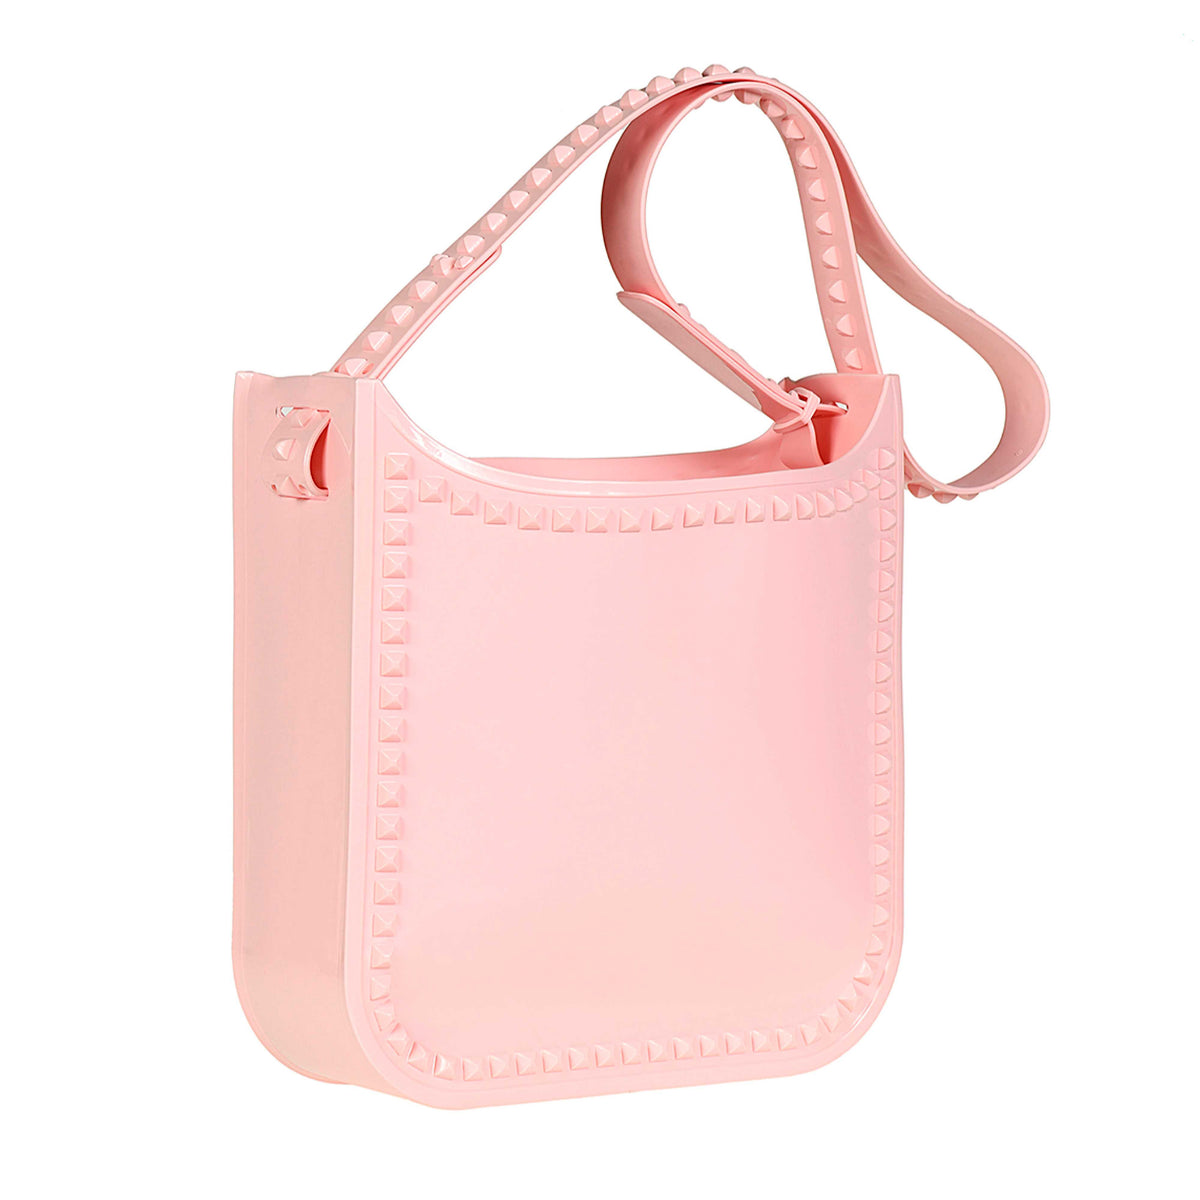 beach purse in baby pink with studs